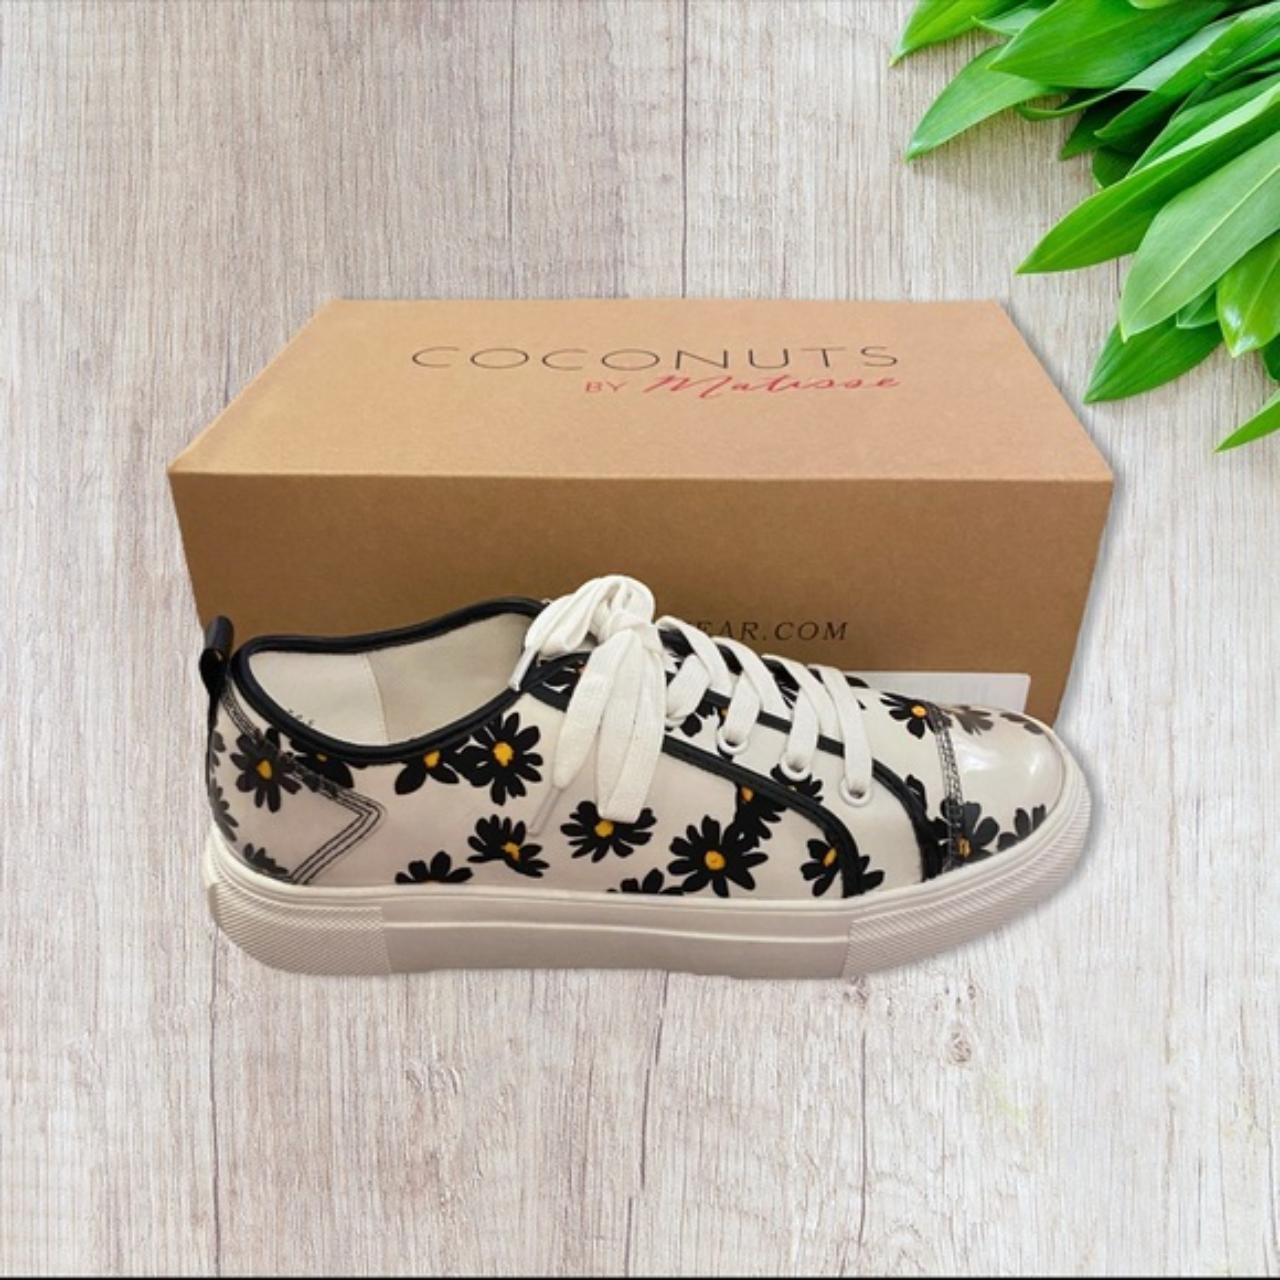 Product Image 1 - Bravo Daisy Sneakers by Matisse

Bloom